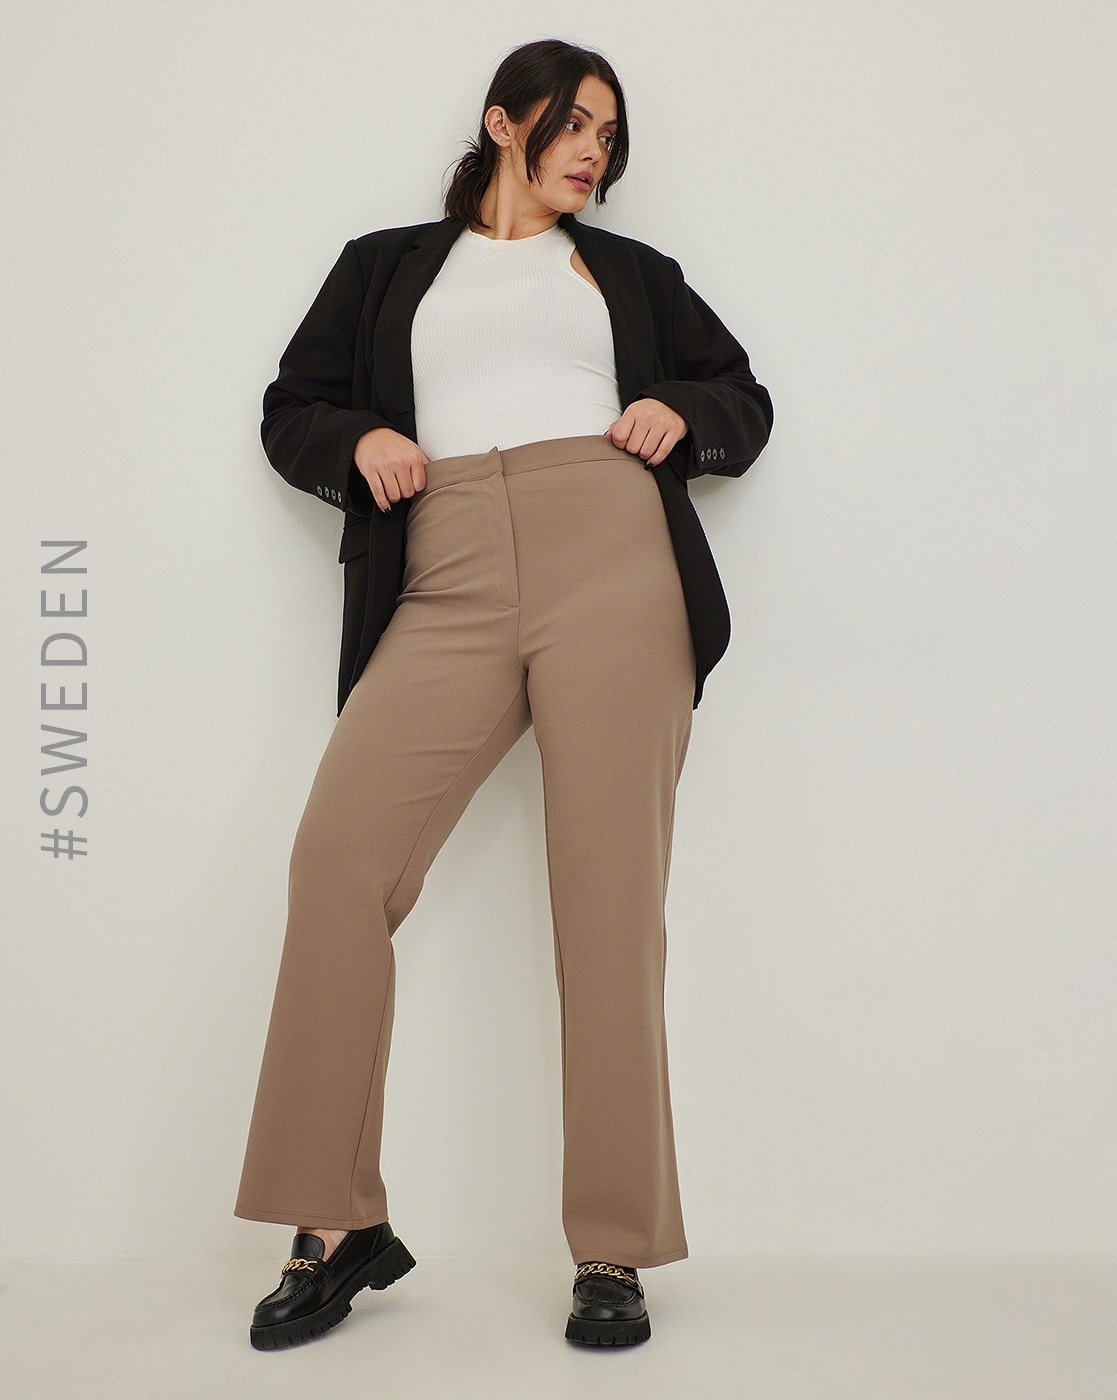 Buy Plus Size Grey Solid Satin High Waist Pants Online For Women